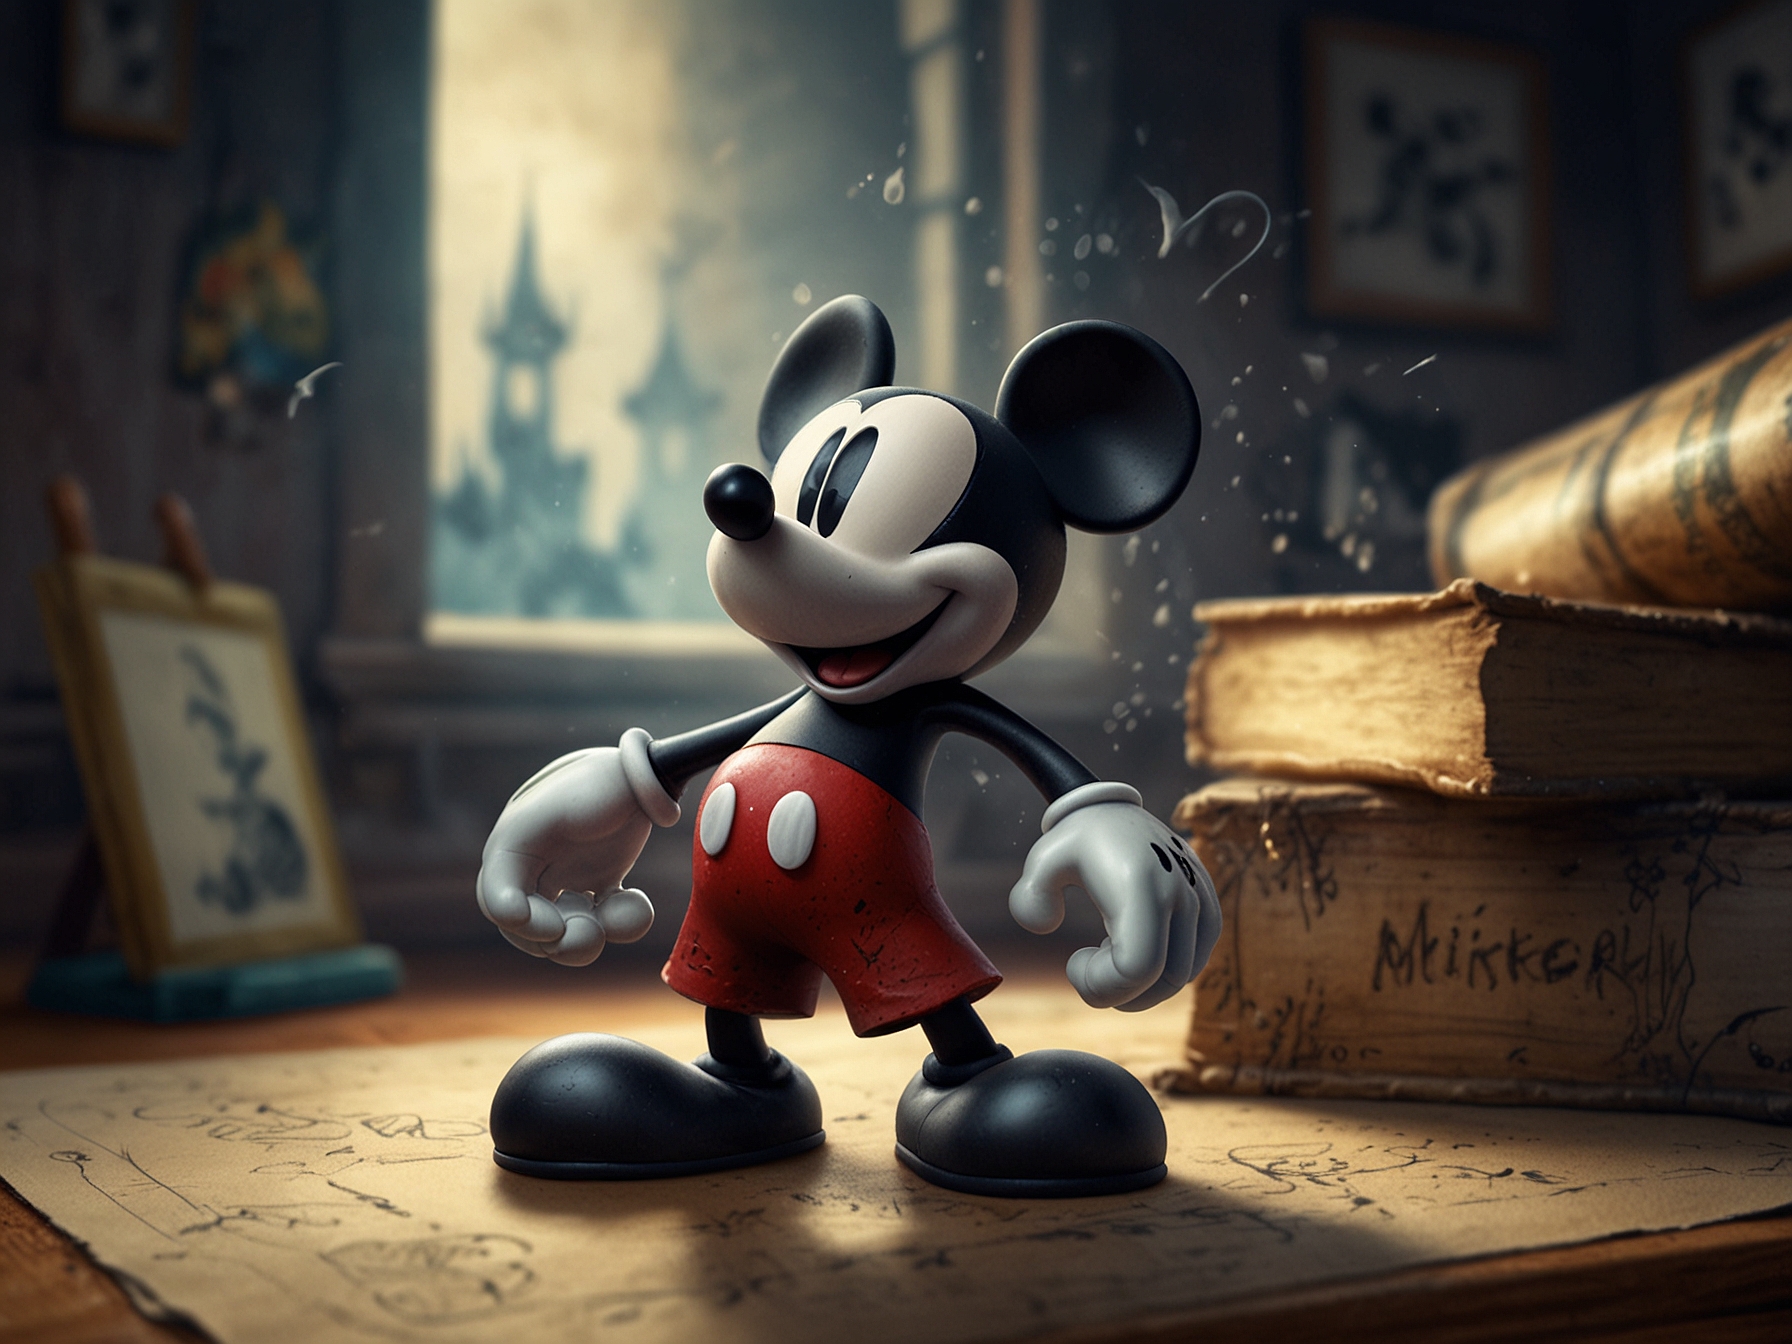 The Collector's Edition of Disney Epic Mickey: Rebrushed, showcasing a detailed Mickey Mouse figurine, an art book, soundtrack CD, and exclusive in-game content.